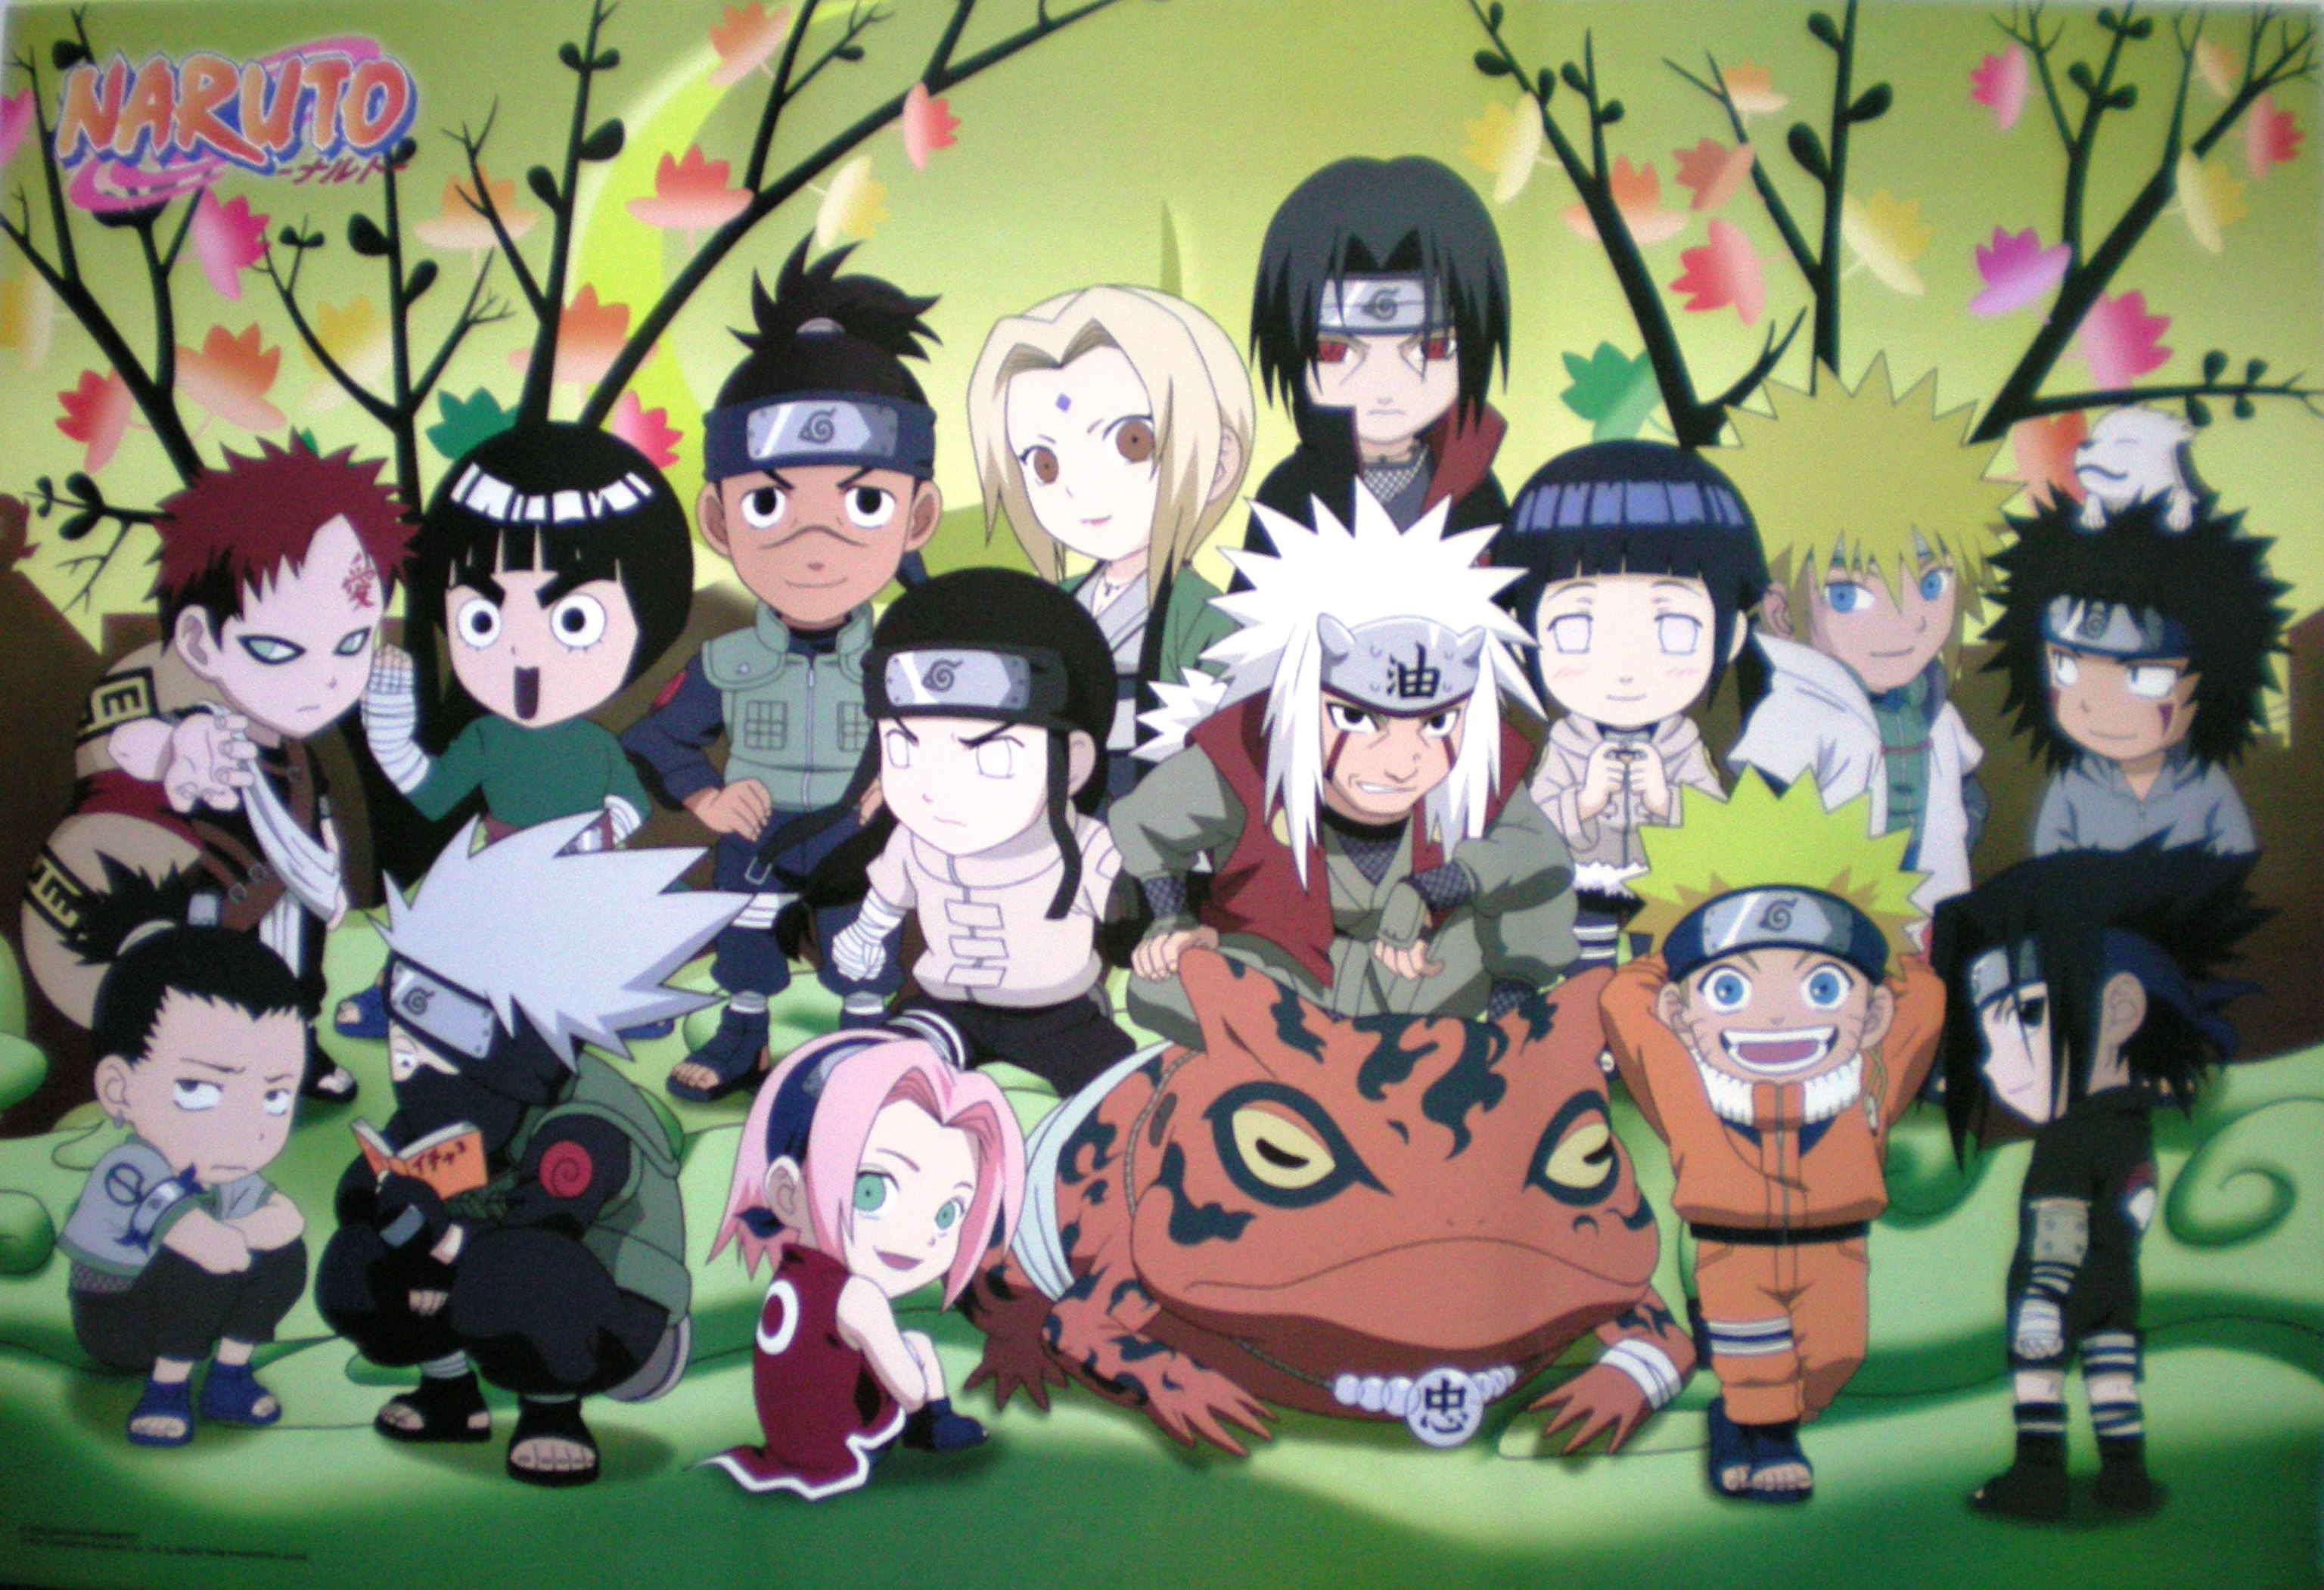 Free Download Naruto Shippuden Characters Chibi Naruto Characters Wallpaper 3072x2102 For Your Desktop Mobile Tablet Explore 46 Naruto Shippuden Cell Phone Wallpaper 15 Naruto Wallpaper Naruto Shippuden Wallpaper Iphone